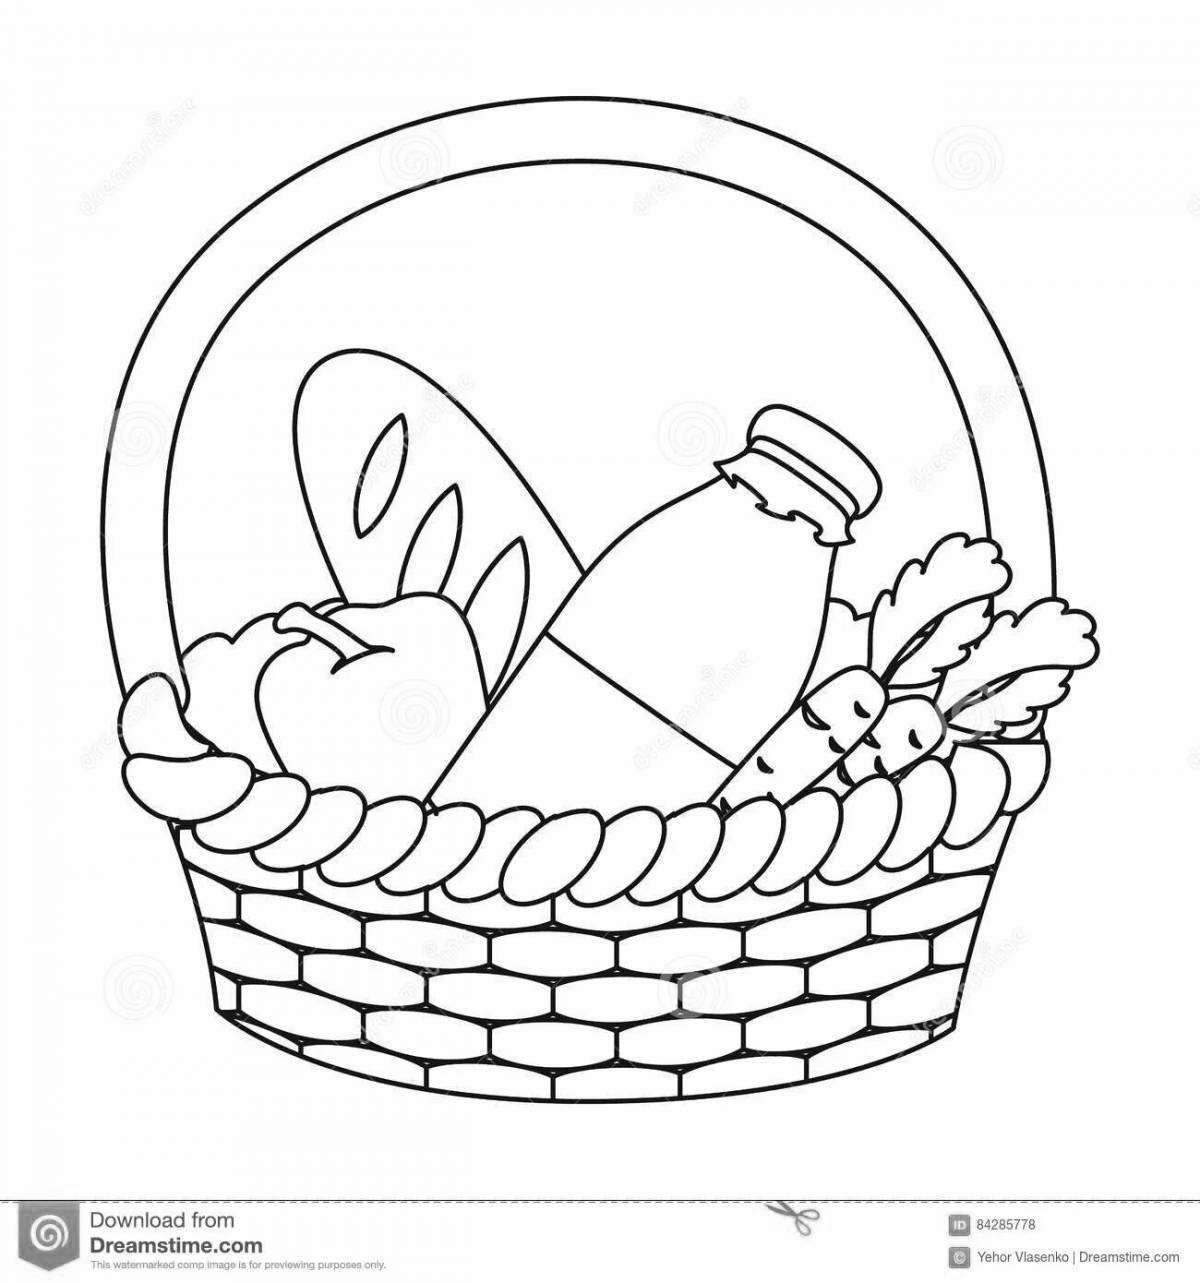 Intricate grocery cart coloring book